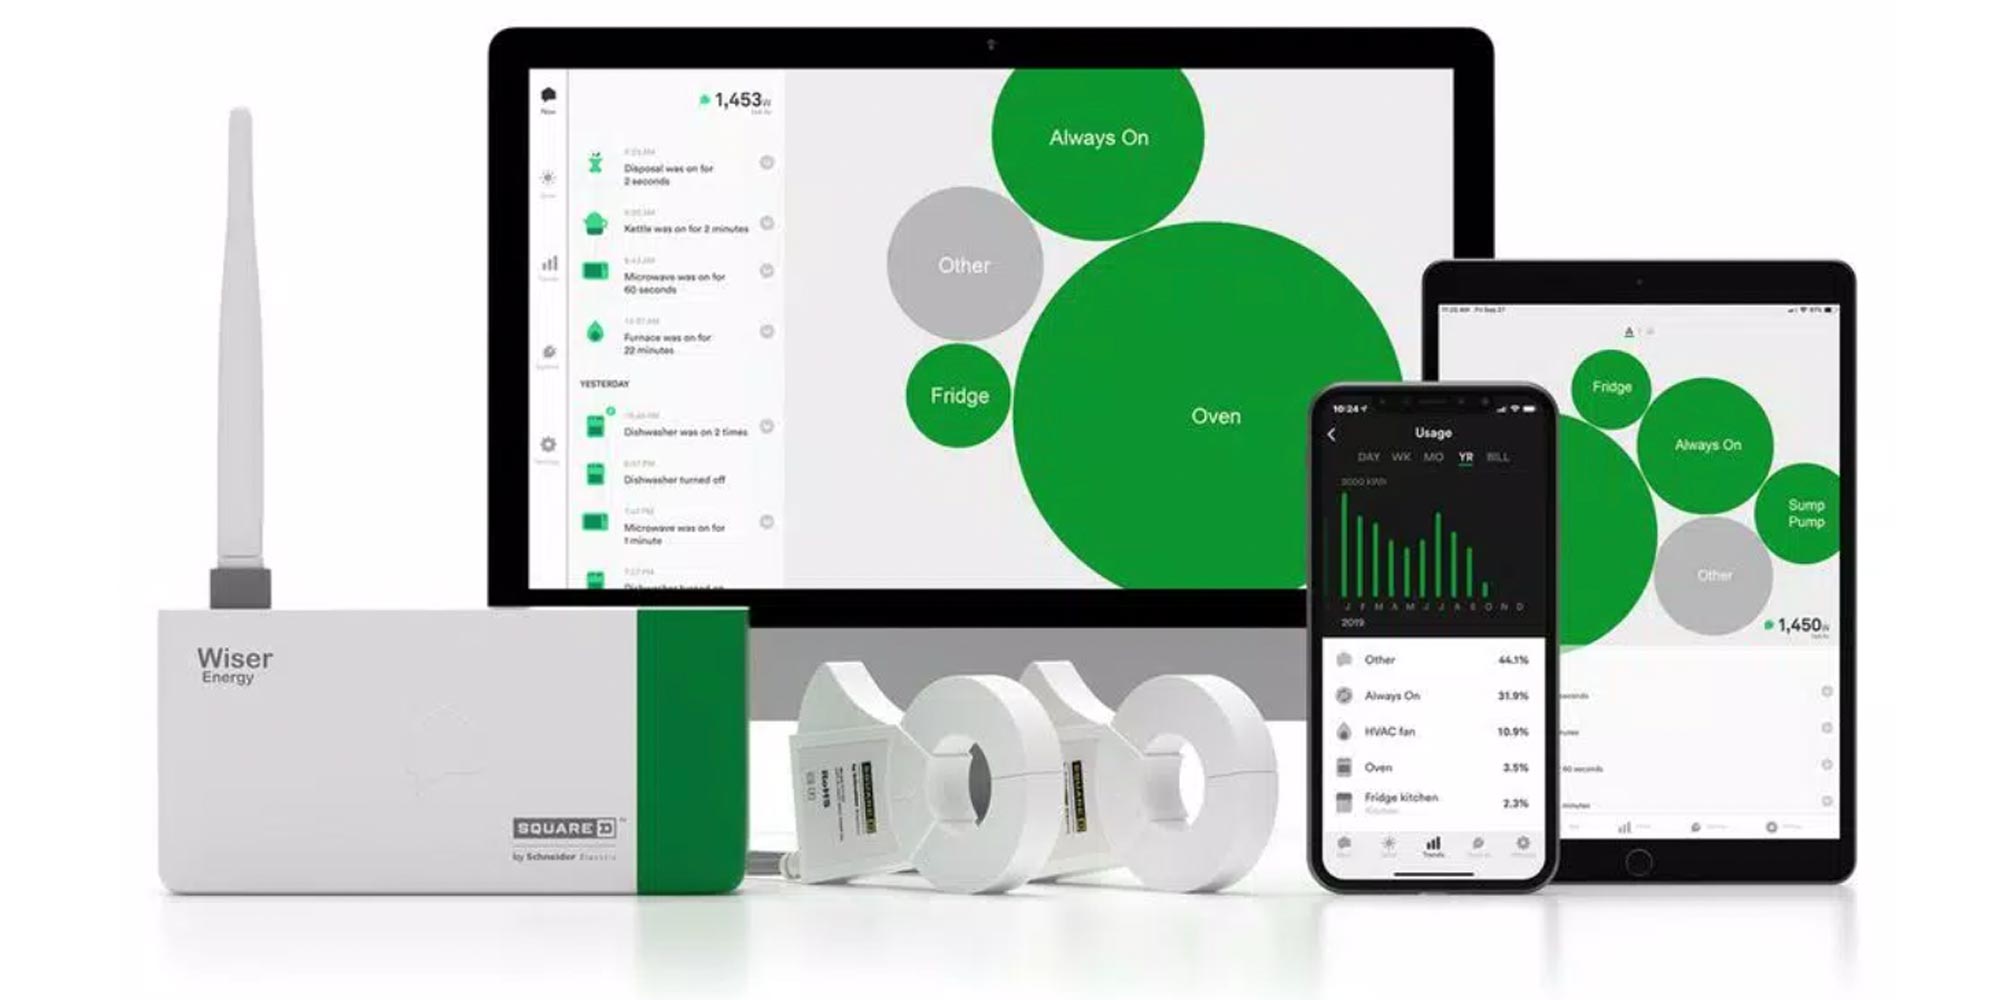 Schneider Electric's Wiser Energy an effective way to monitor